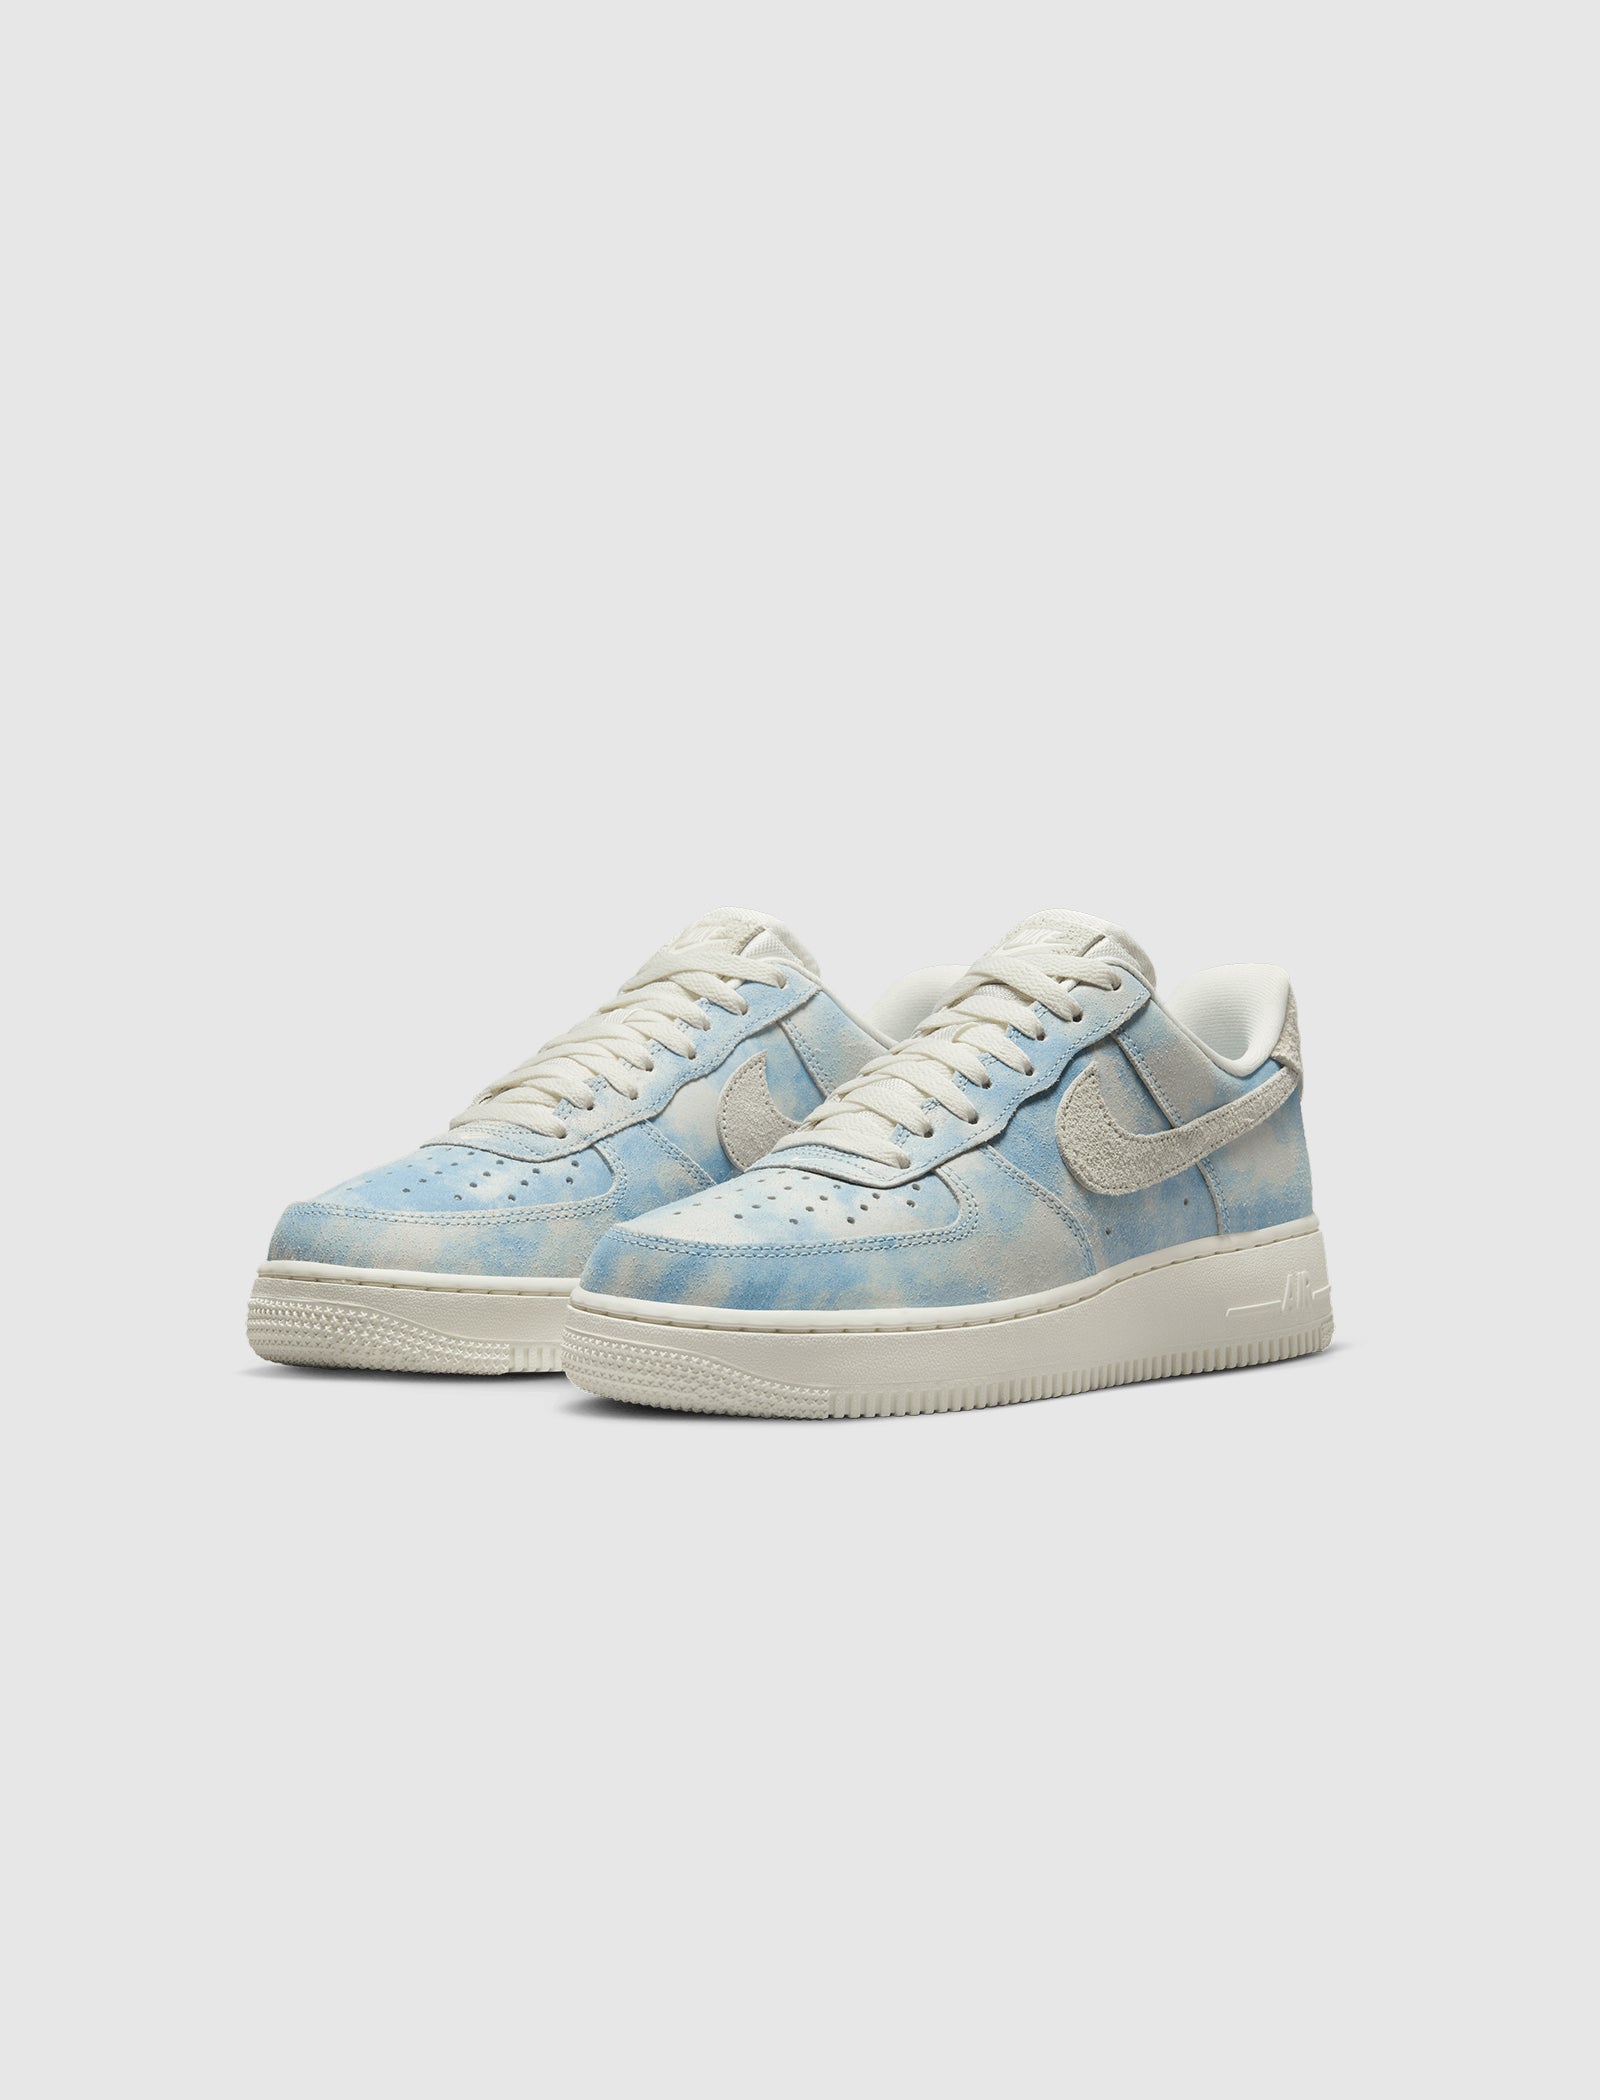 WOMEN'S AIR FORCE 1 '07 SE "CLOUDS"